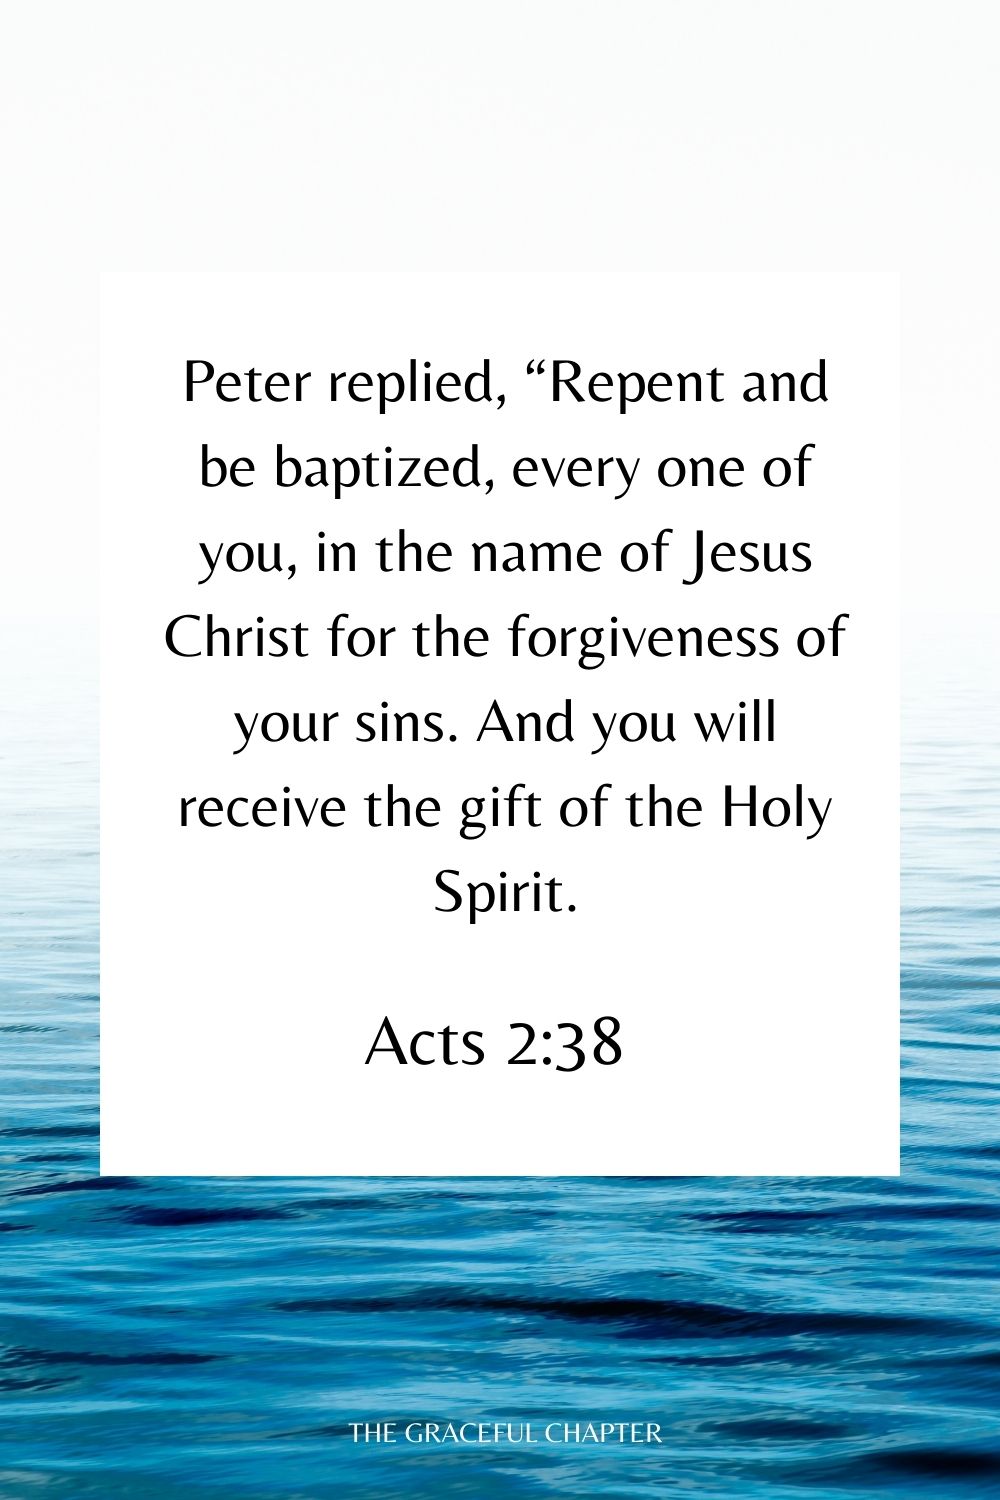 Peter replied, “Repent and be baptized, every one of you, in the name of Jesus Christ for the forgiveness of your sins. And you will receive the gift of the Holy Spirit. Acts 2:38